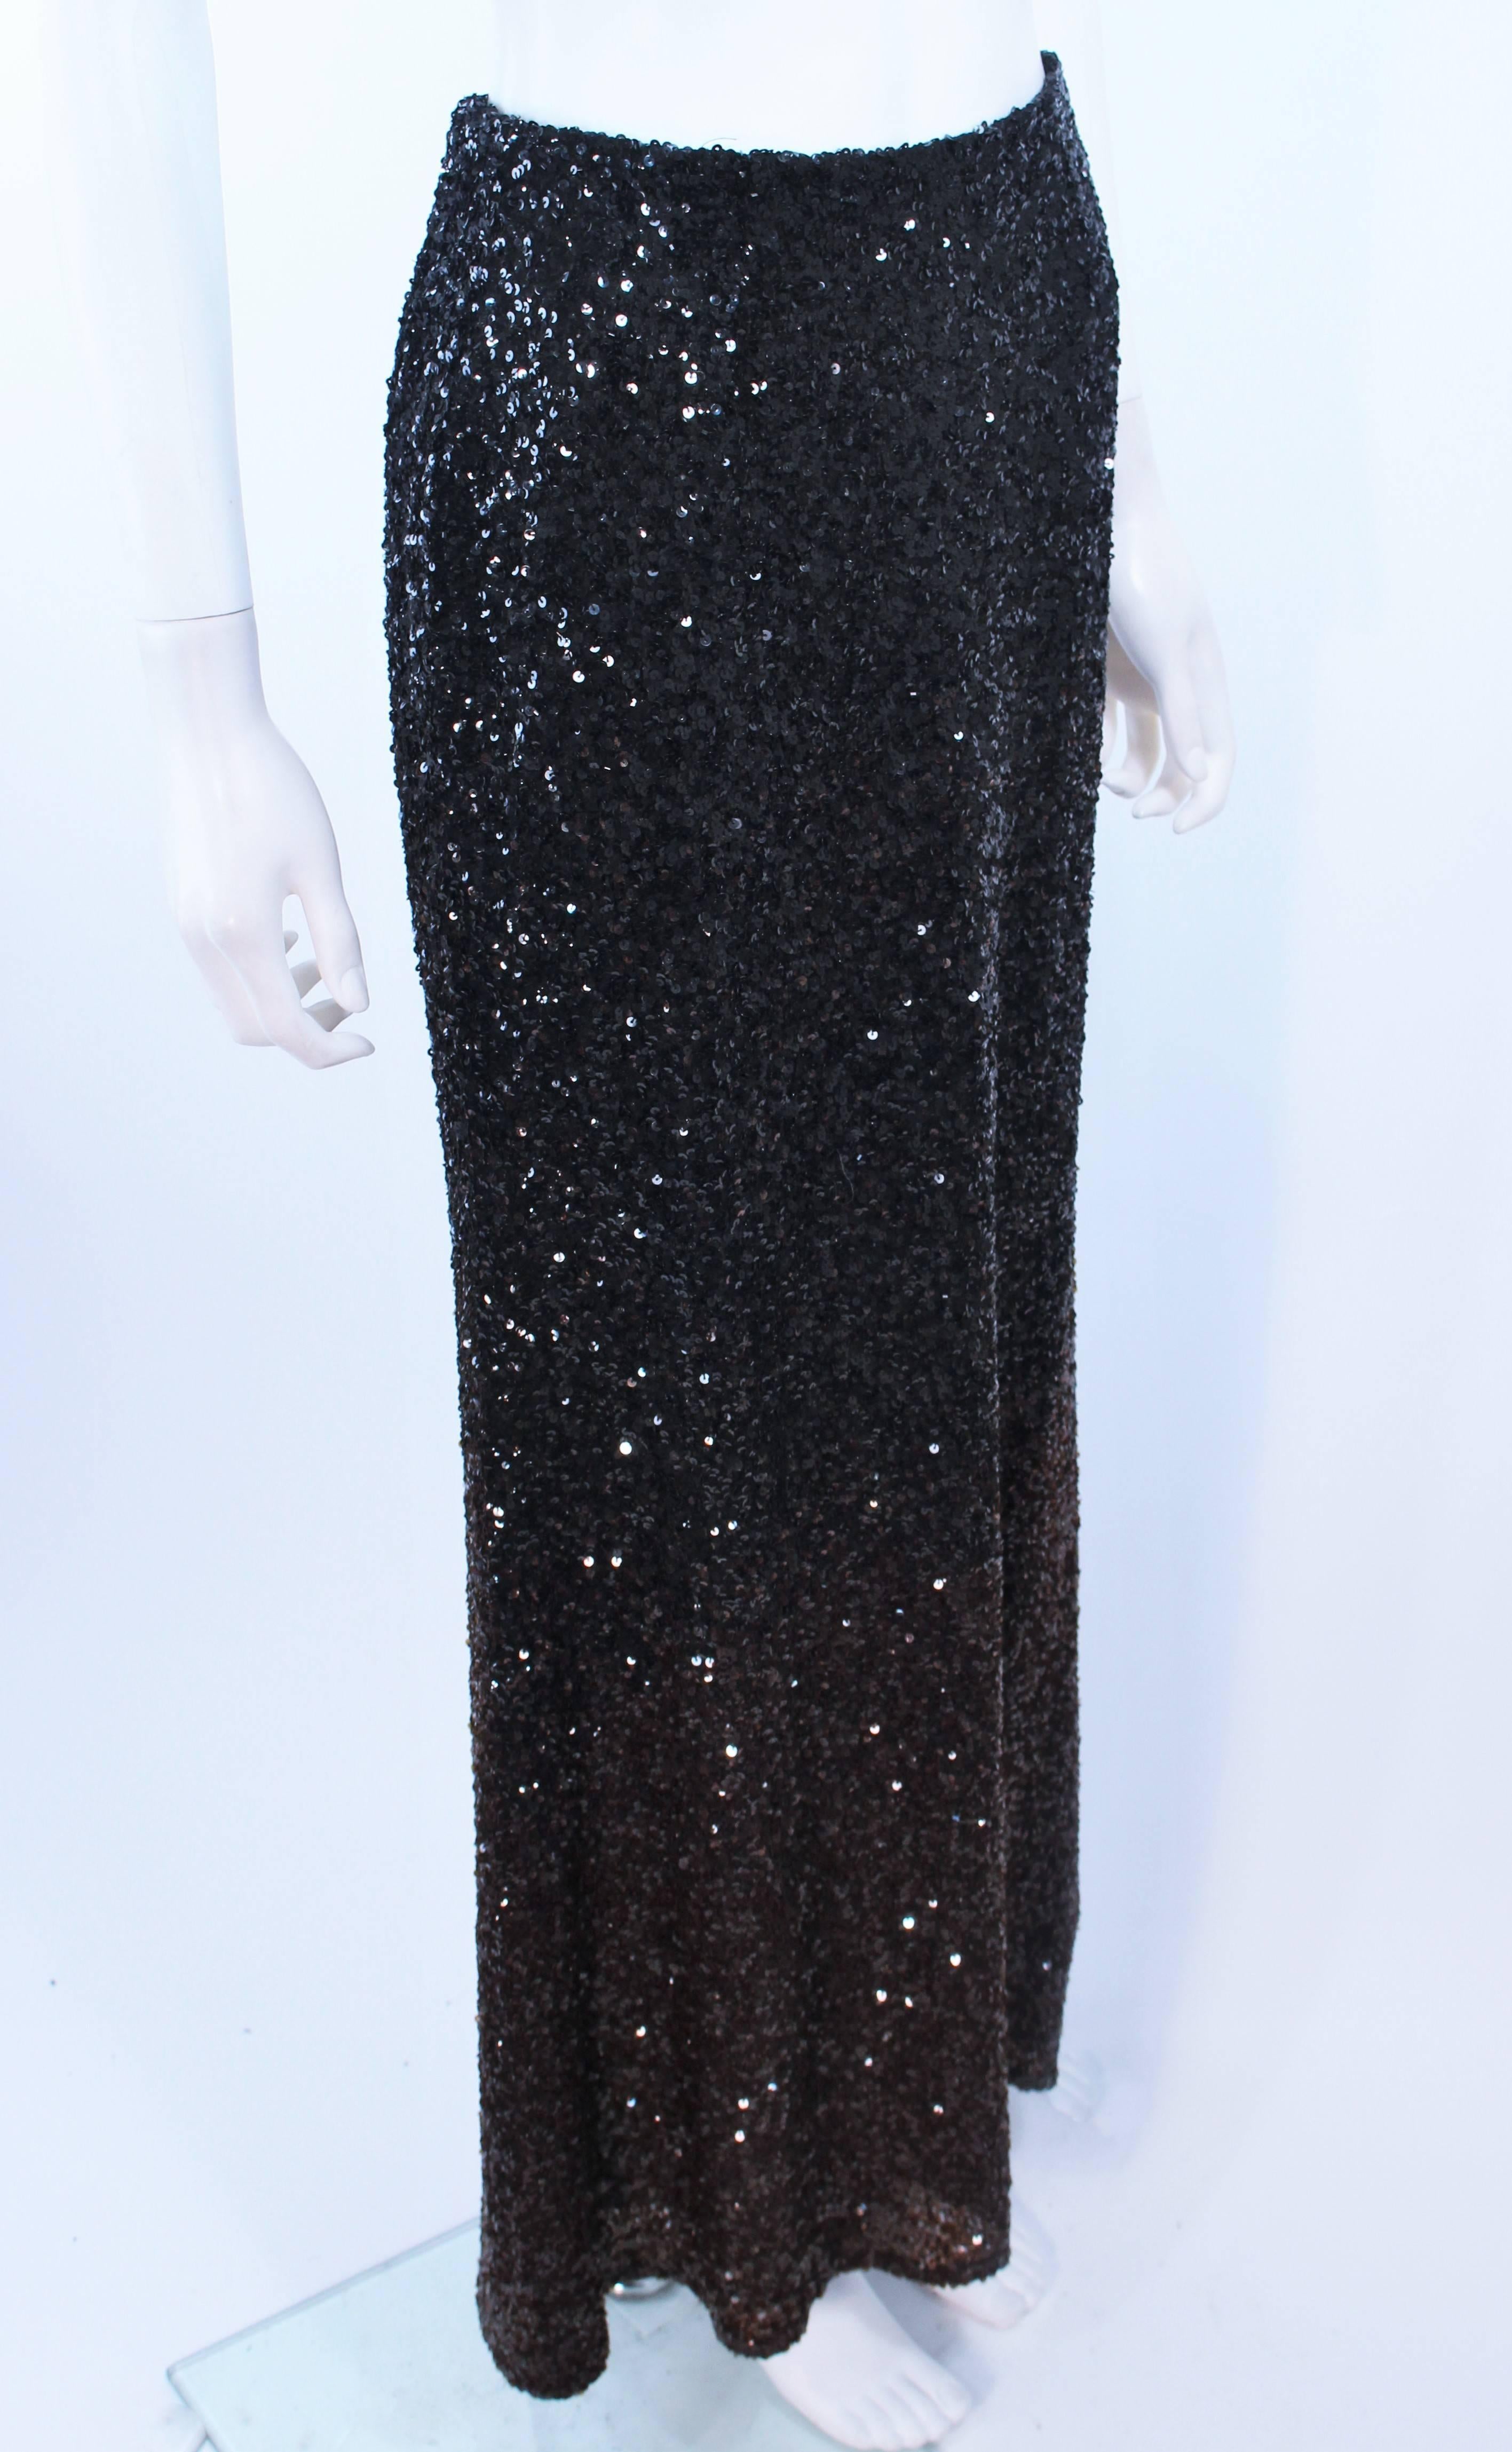 BILL BLASS Black and Brown Sequin Ombre Skirt Size 6 In Excellent Condition For Sale In Los Angeles, CA